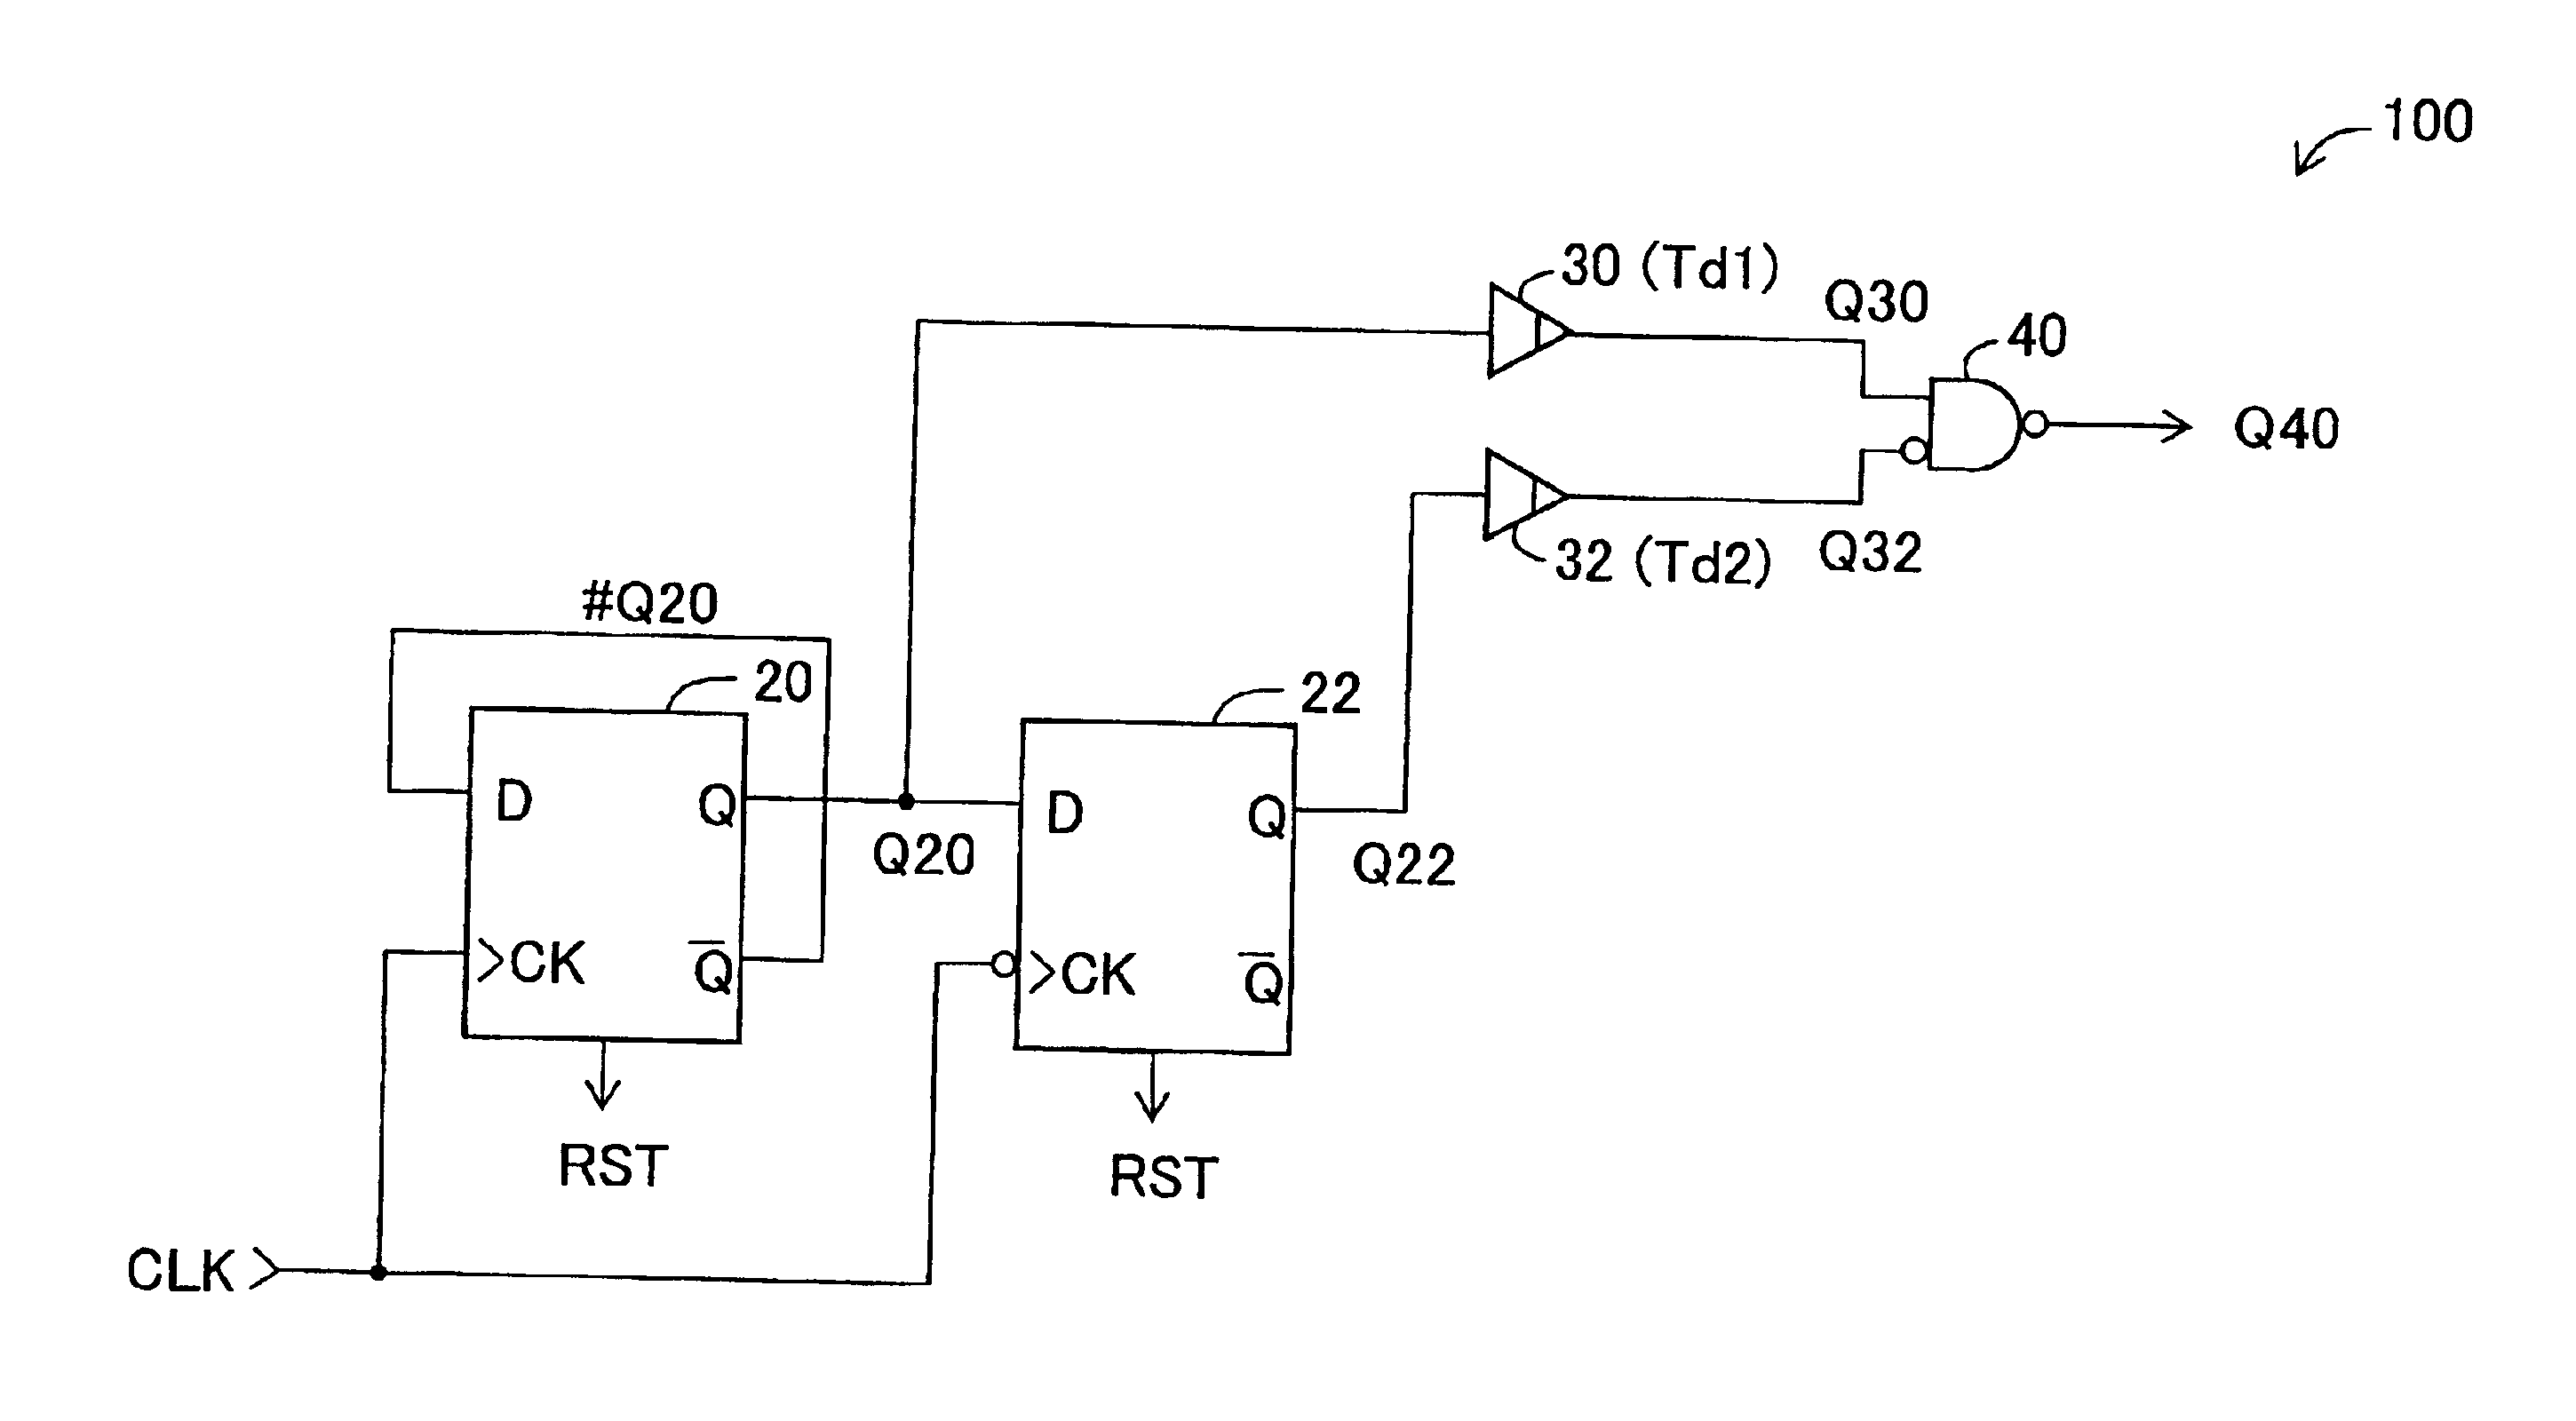 Generation of pulse signals from a clock signal